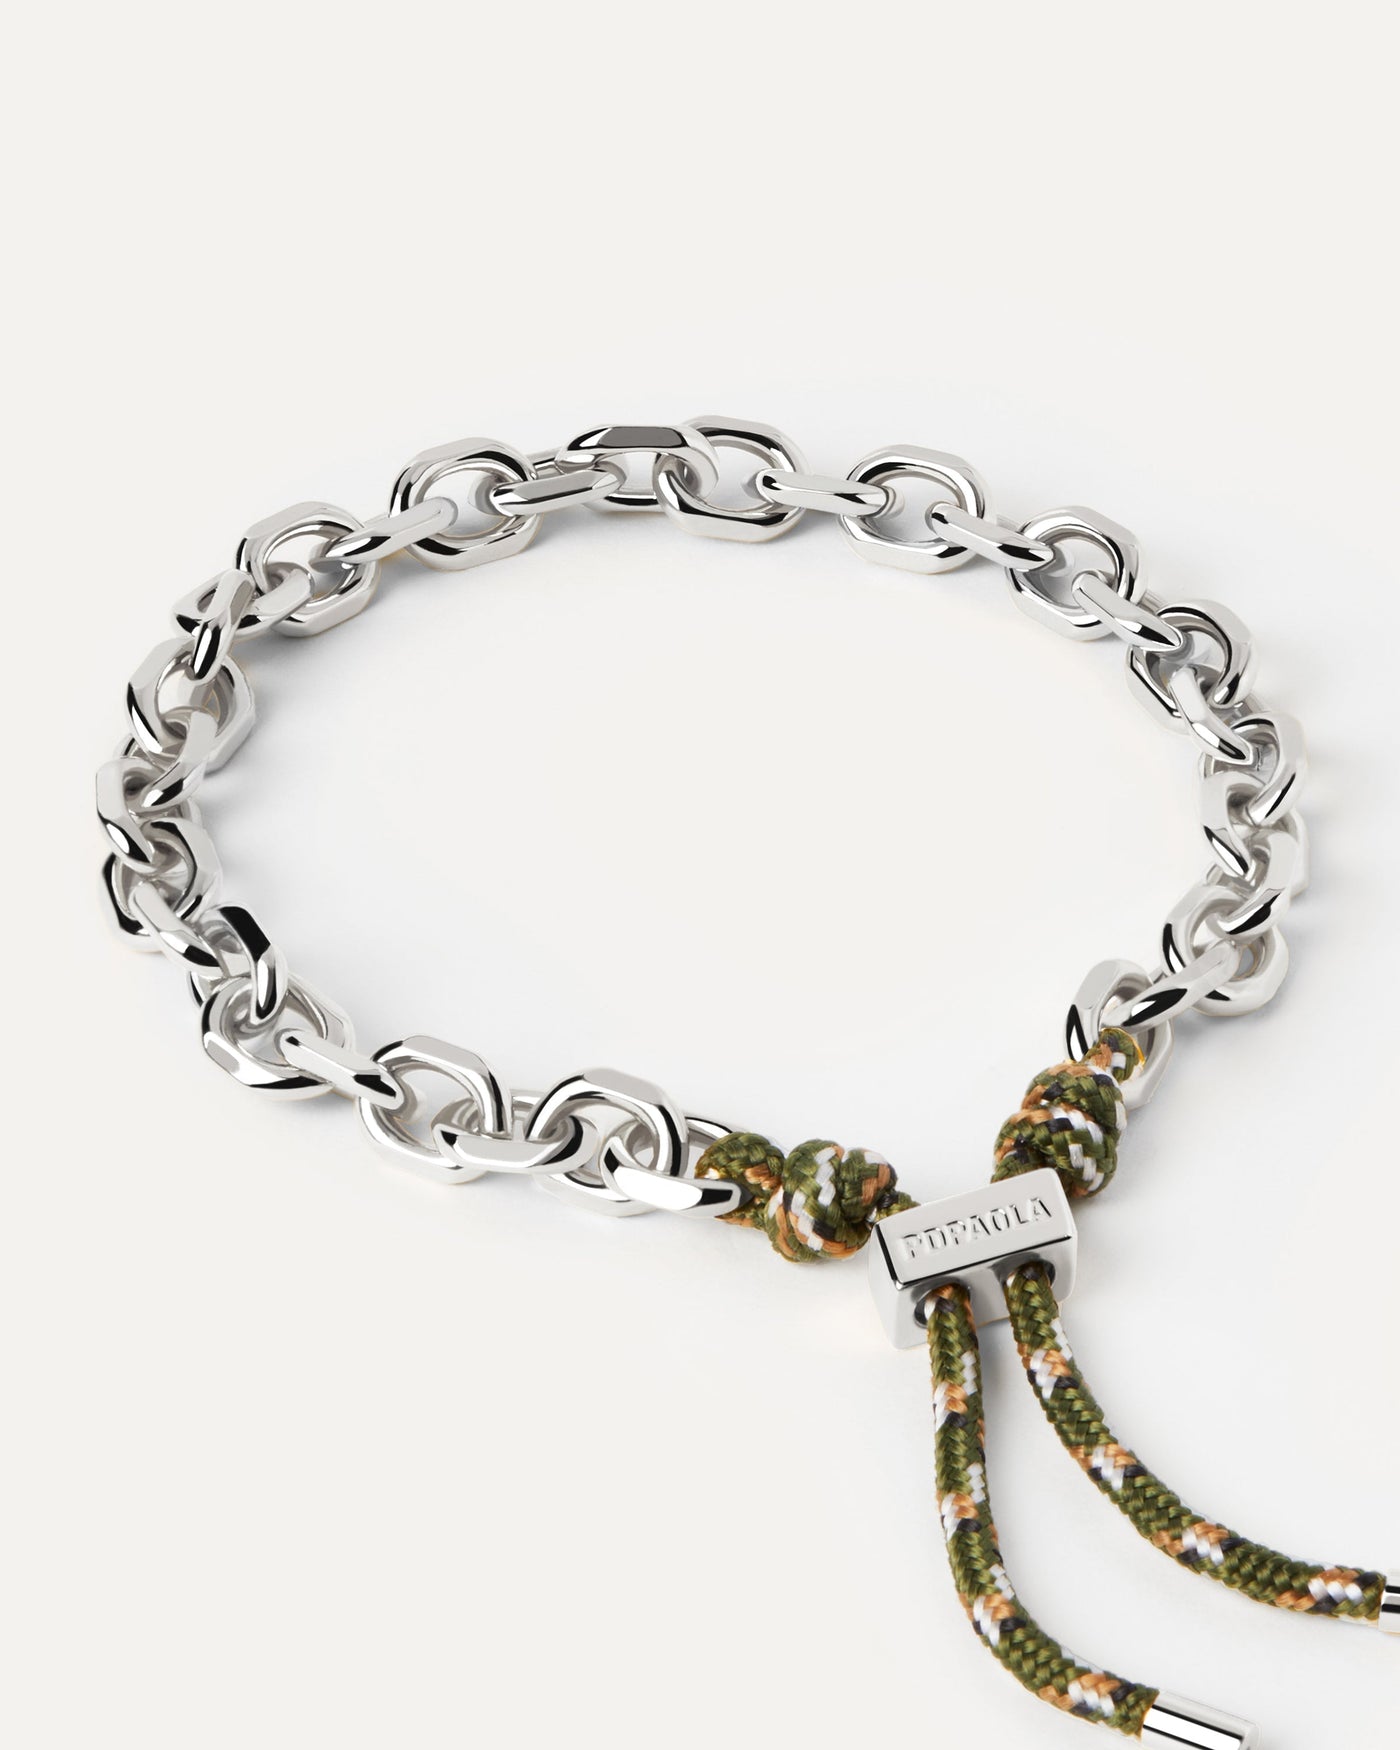 2023 Selection | Cottage Essential Rope and Chain Silver Bracelet. Silver chain bracelet with an orange rope adjustable sliding clasp. Get the latest arrival from PDPAOLA. Place your order safely and get this Best Seller. Free Shipping.